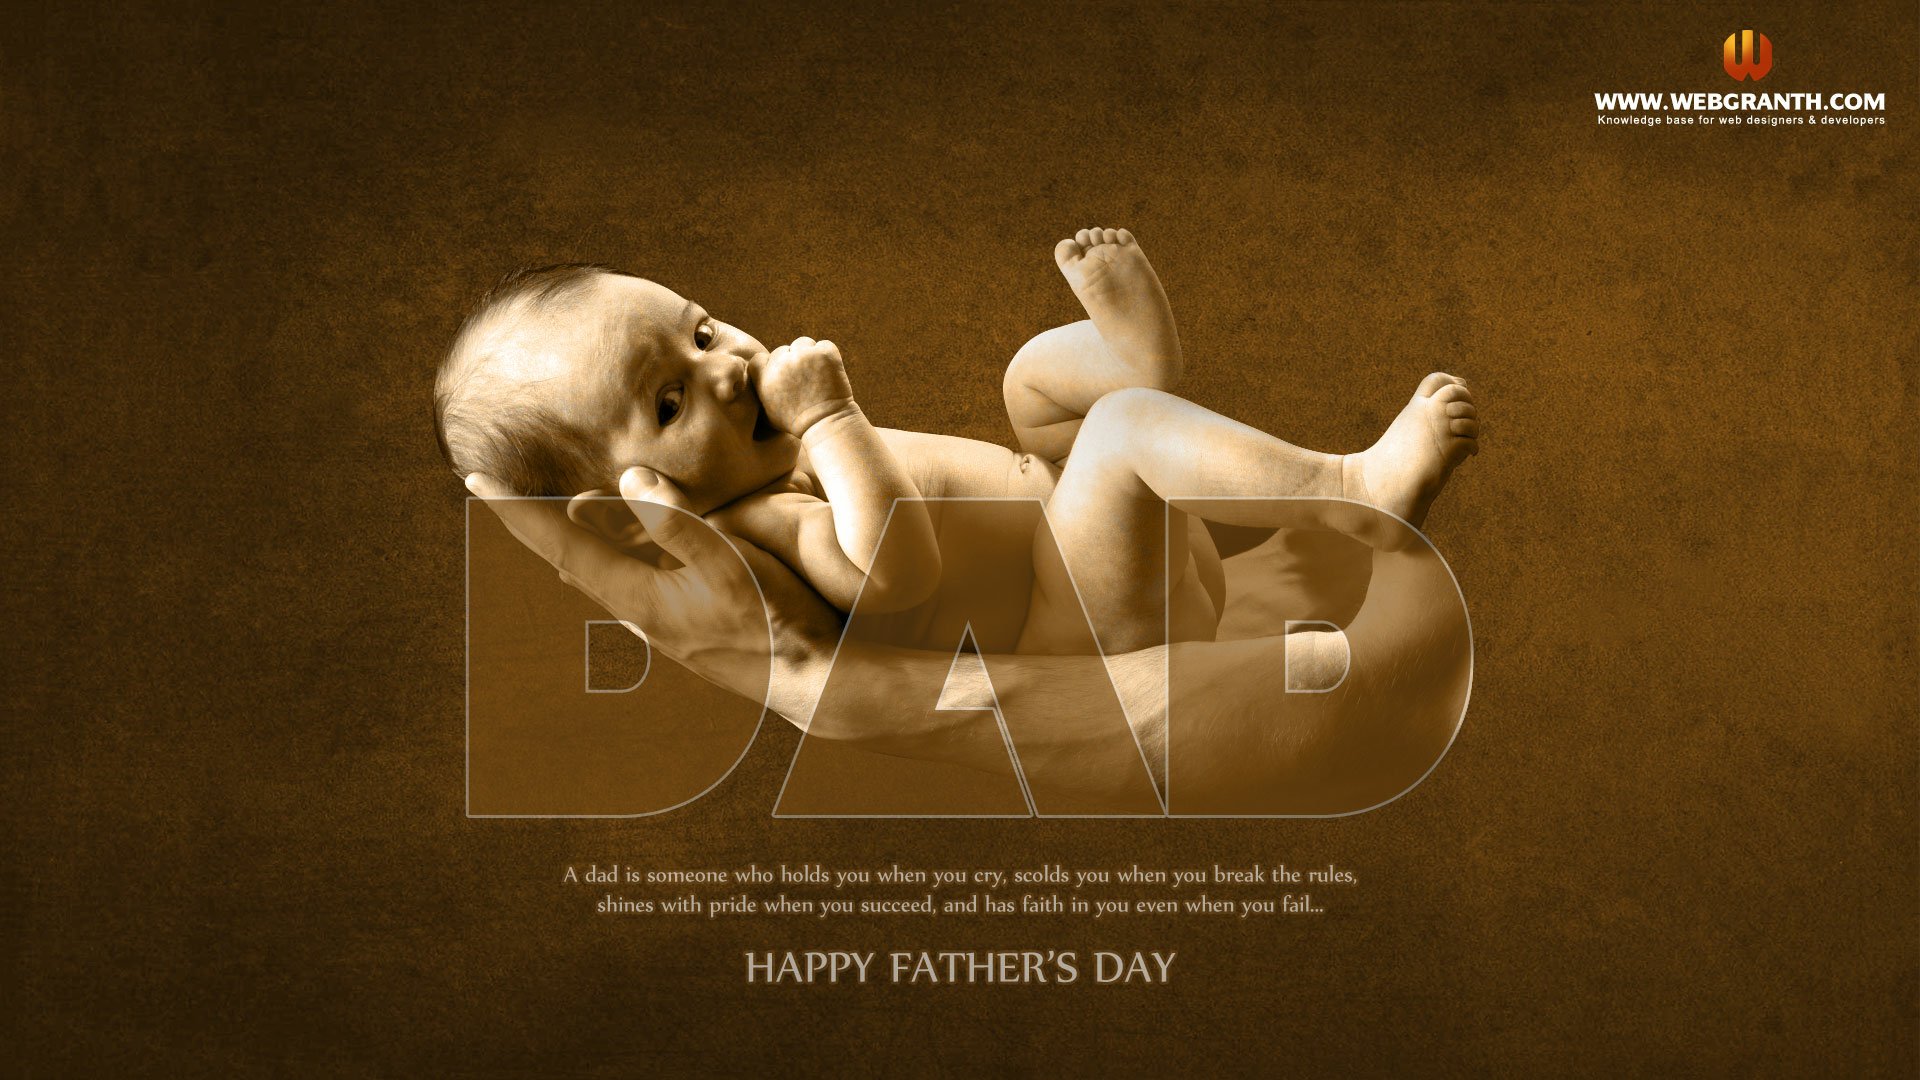 HD Father's Day themed wallpaper featuring a baby and a tribute message for Dad, set against a brown background.